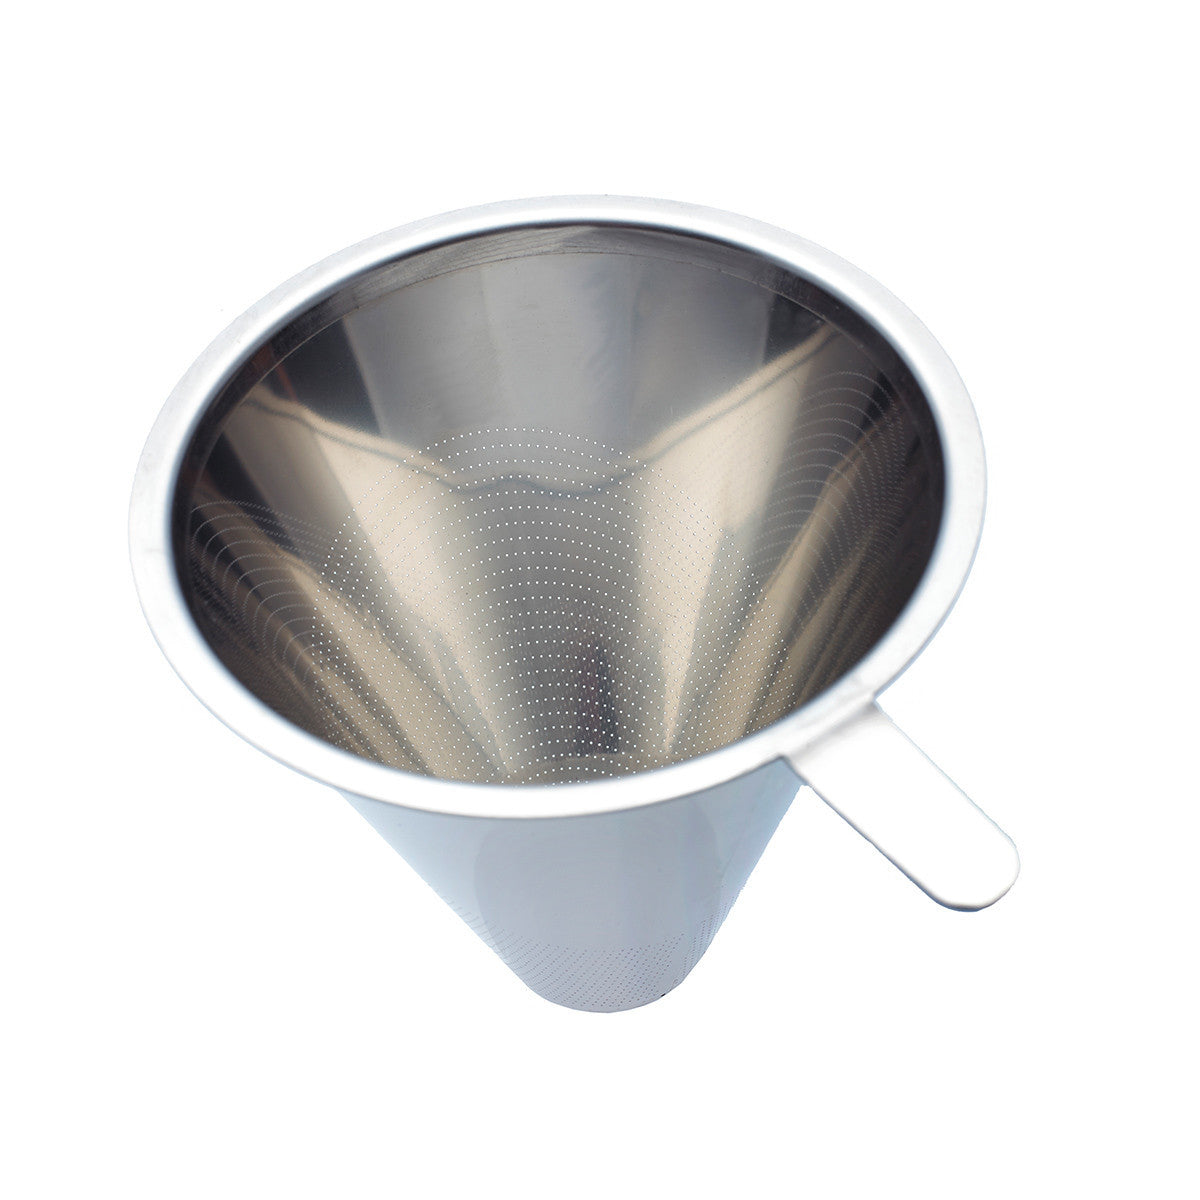 https://shopgrosche-test.myshopify.com/cdn/shop/products/Stainless-Steel-permanenent-filter-for-Grosche-Pour-Over-Coffee-Pot-low-res_04045ca7-7d28-4e55-a2db-6bdf67562300.jpeg?v=1420735986